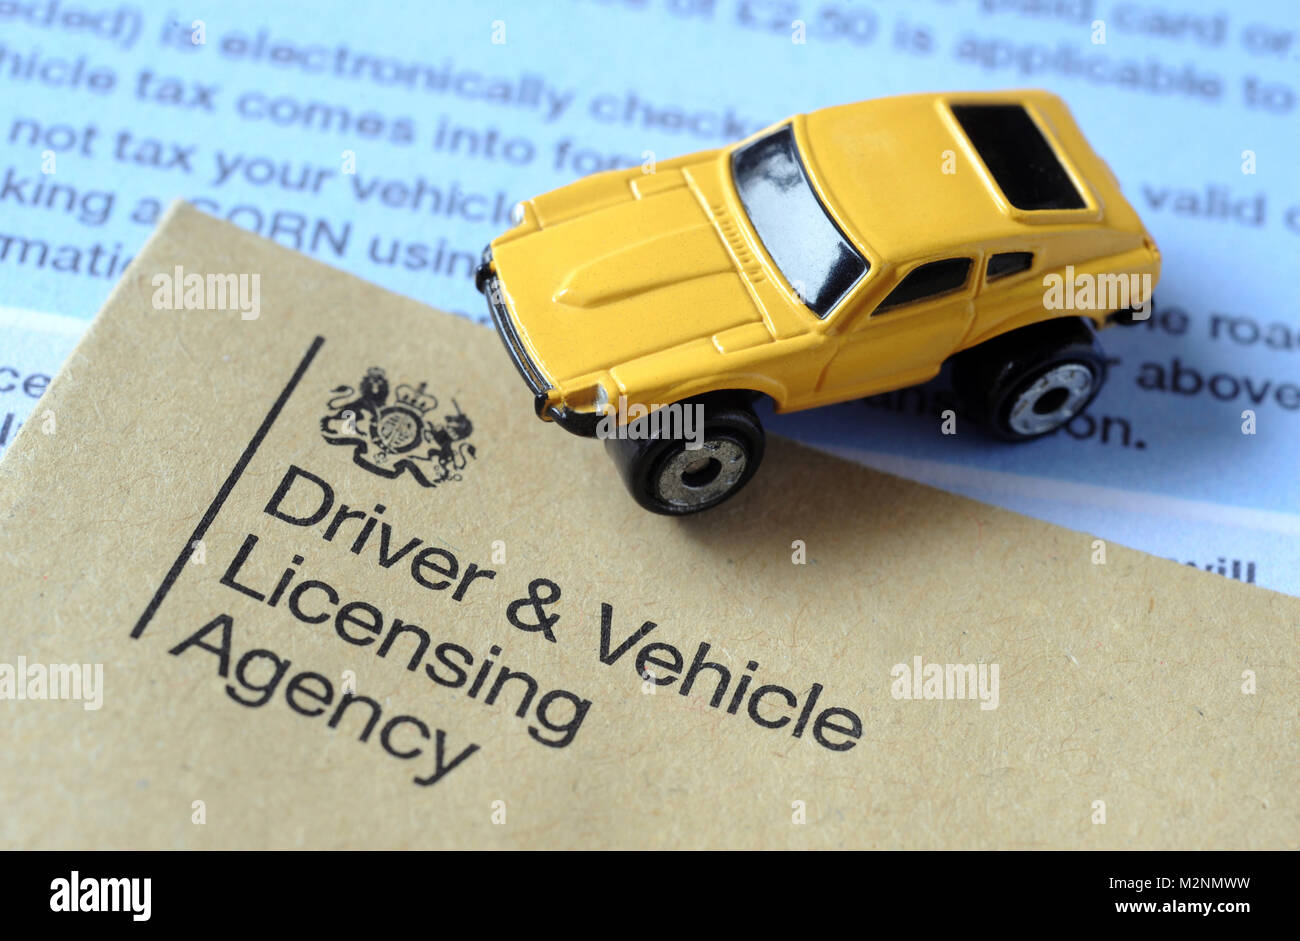 'DVLA'  LITERATURE AND LOGO WITH MODEL CAR RE DVLA DRIVER VEHICLE LICENSING AGENCY ROAD TAX EXCISE LICENSE MOTORISTS ETC Stock Photo